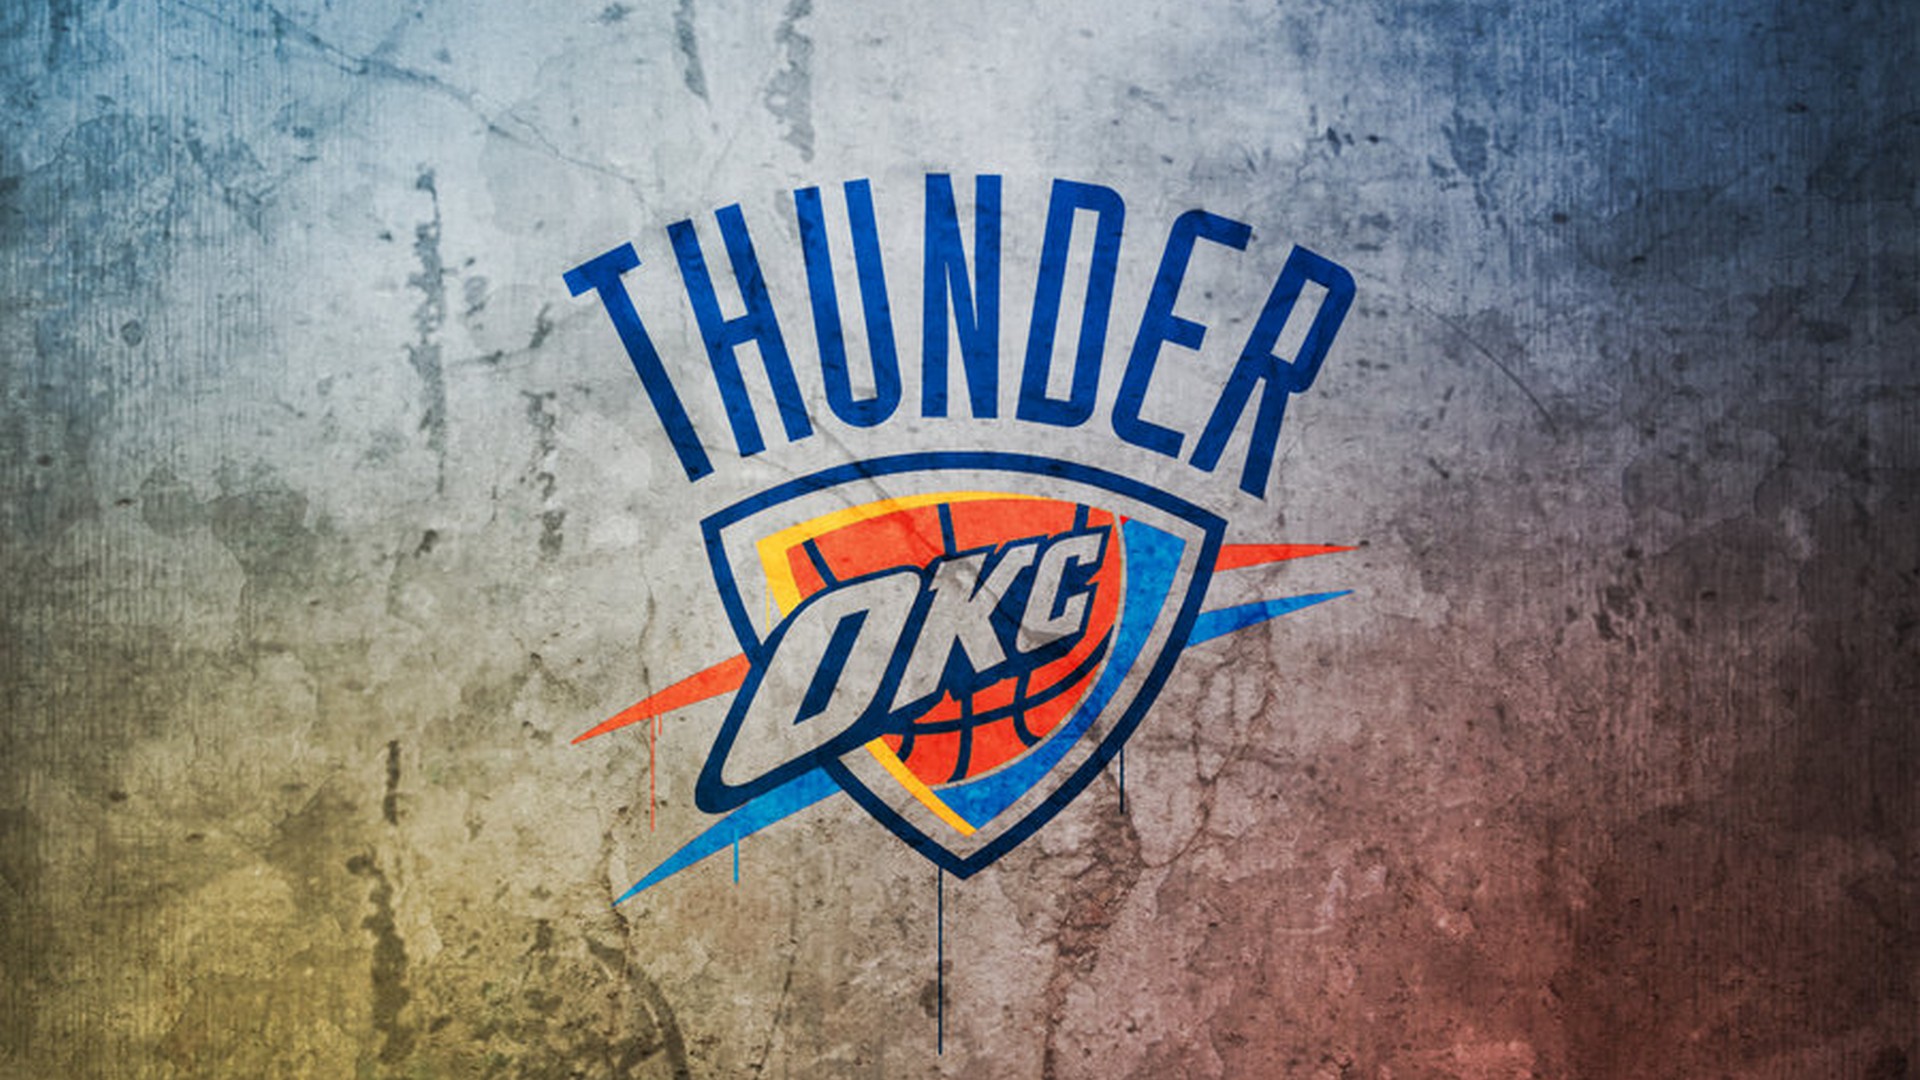 Oklahoma City Thunder Desktop Wallpapers with high-resolution 1920x1080 pixel. You can use this wallpaper for your Desktop Computer Backgrounds, Windows or Mac Screensavers, iPhone Lock screen, Tablet or Android and another Mobile Phone device